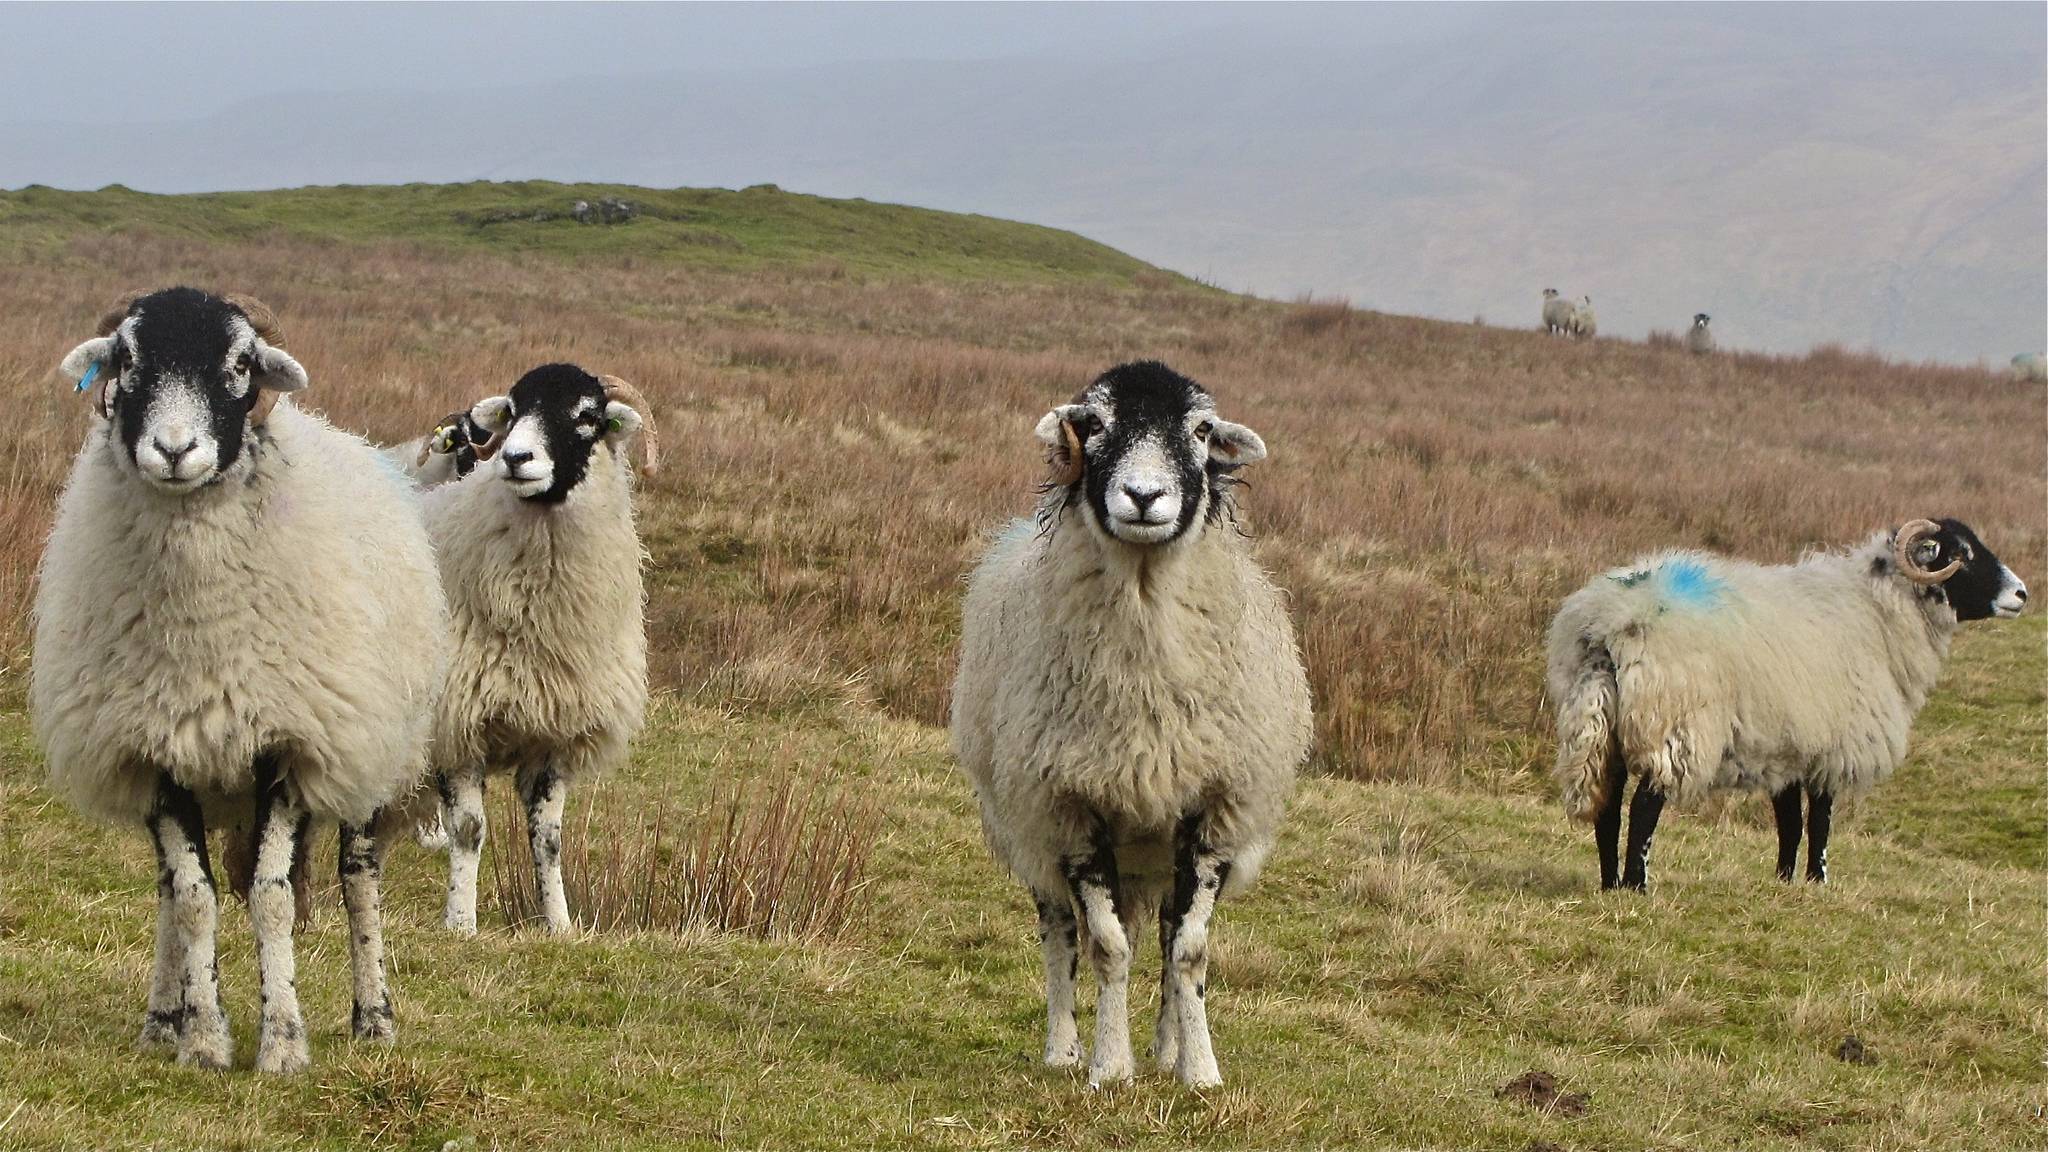 Sheep to join the internet of things